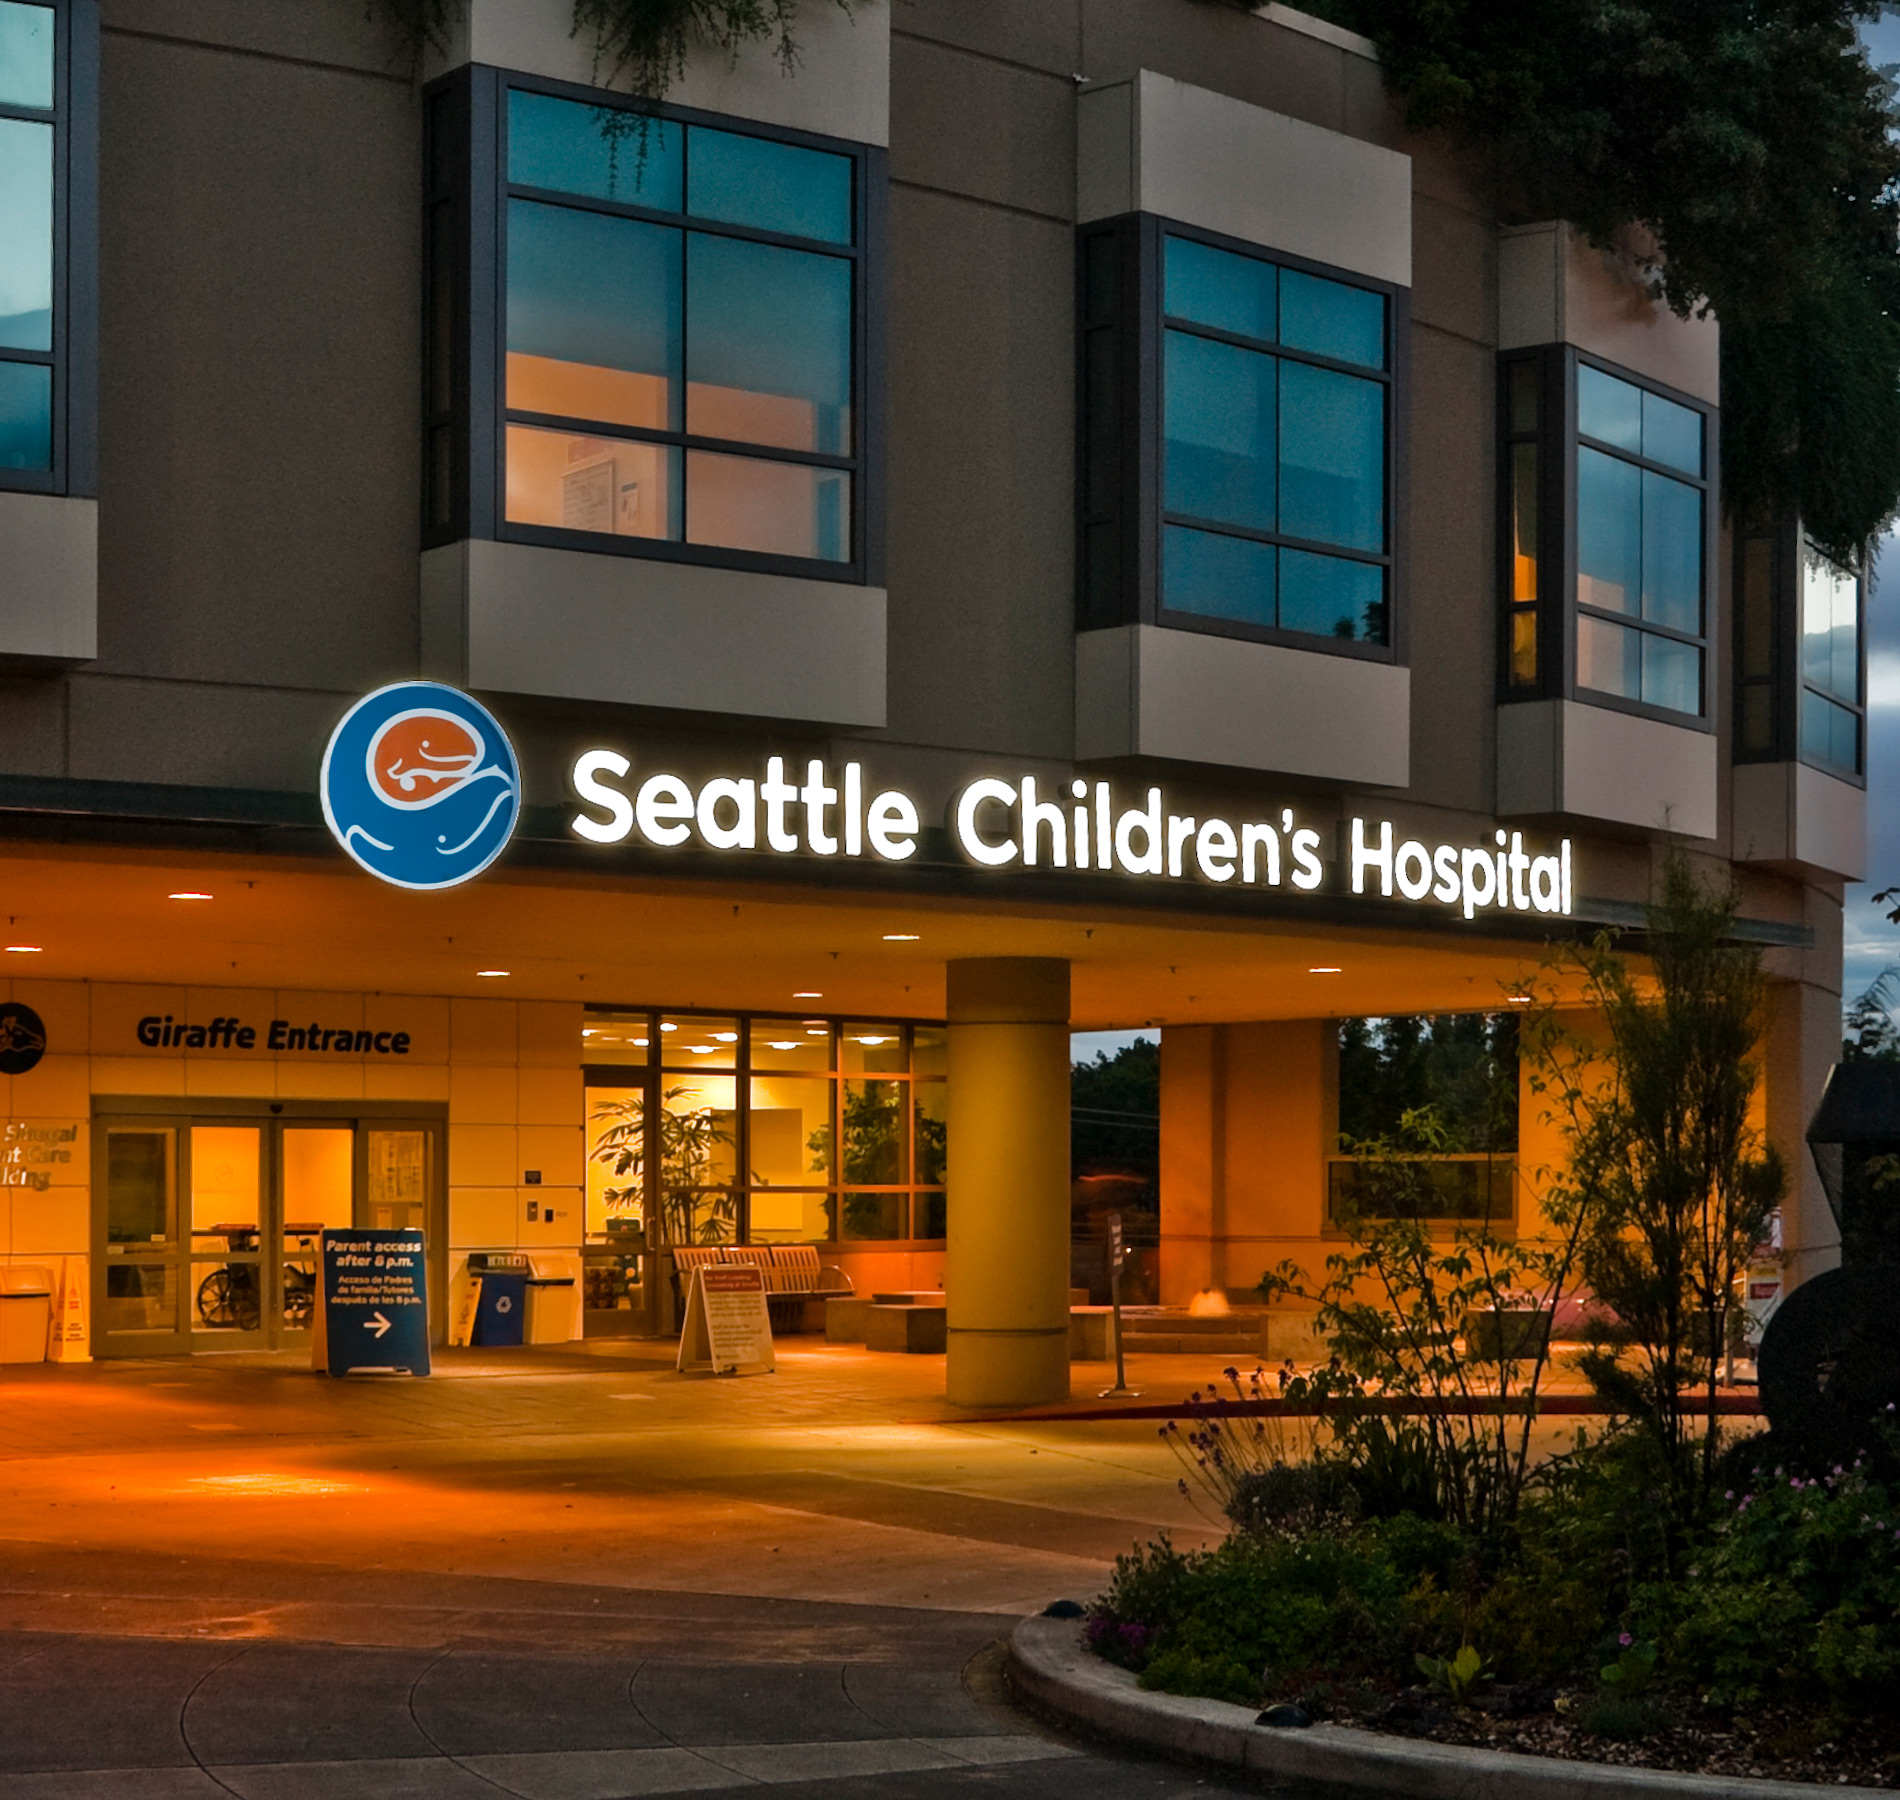 Image of the Seattle Children's Hospital